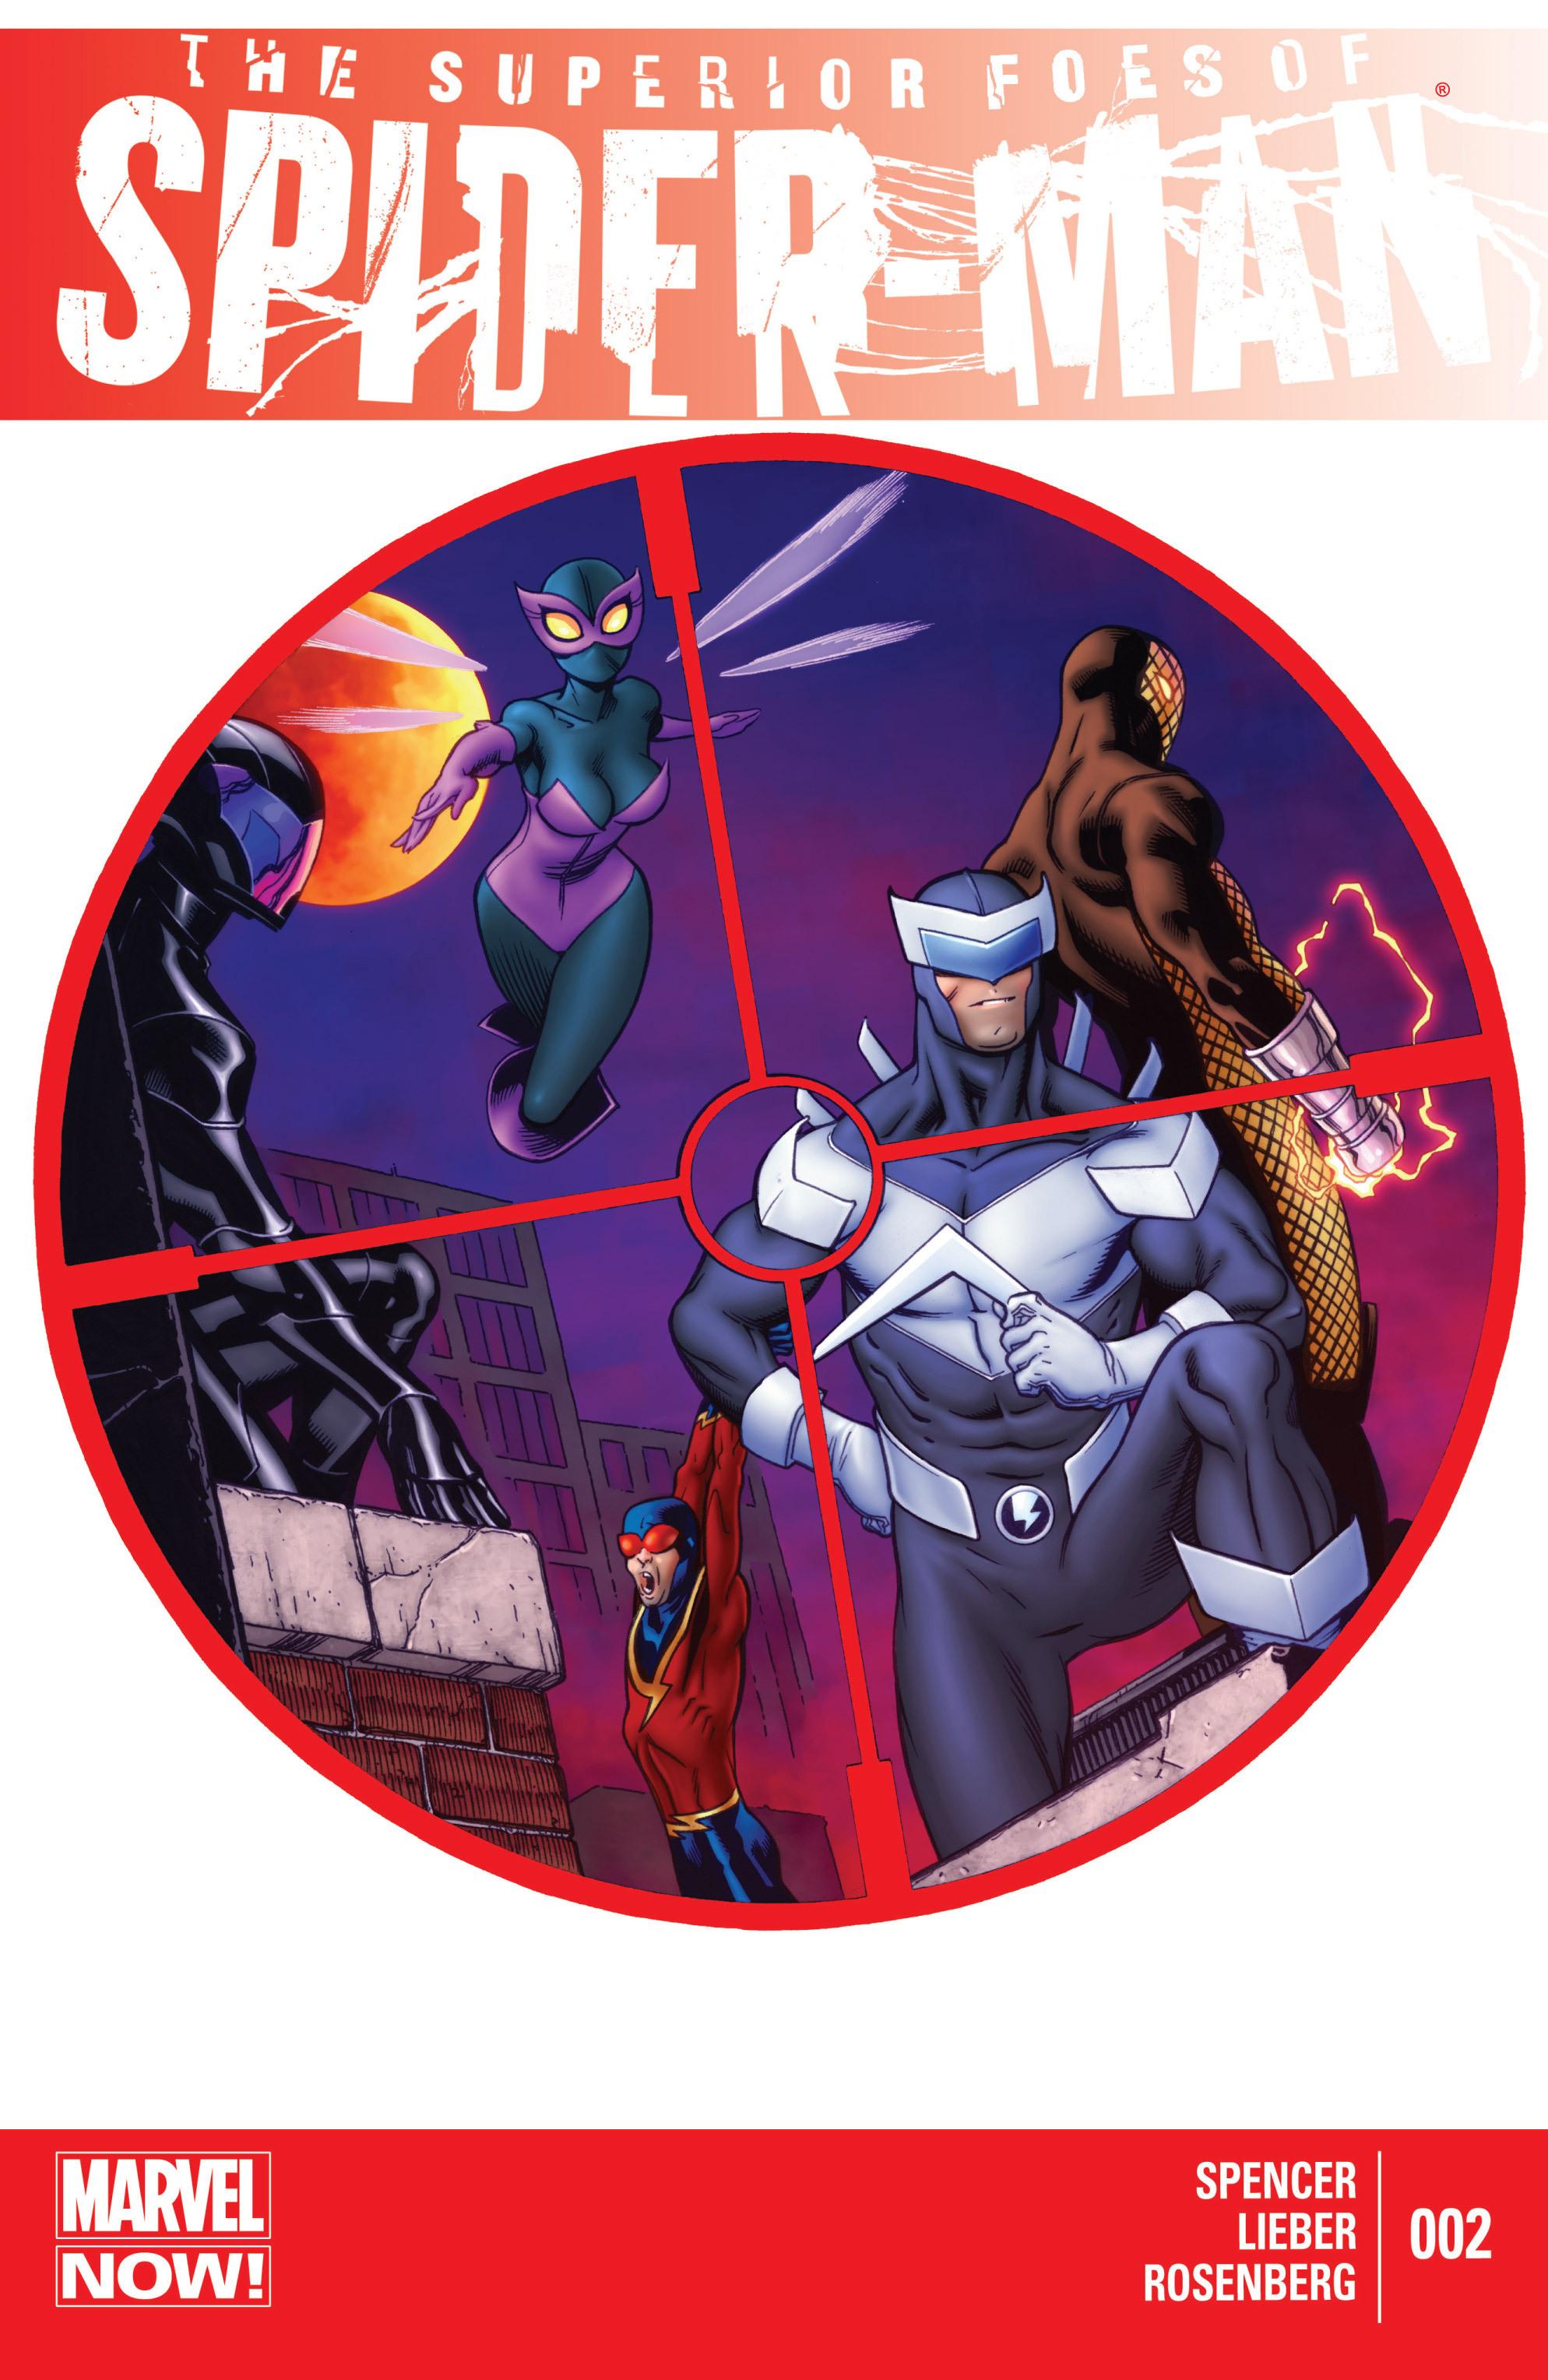 The Superior Foes of Spider-Man Vol. 1 #2